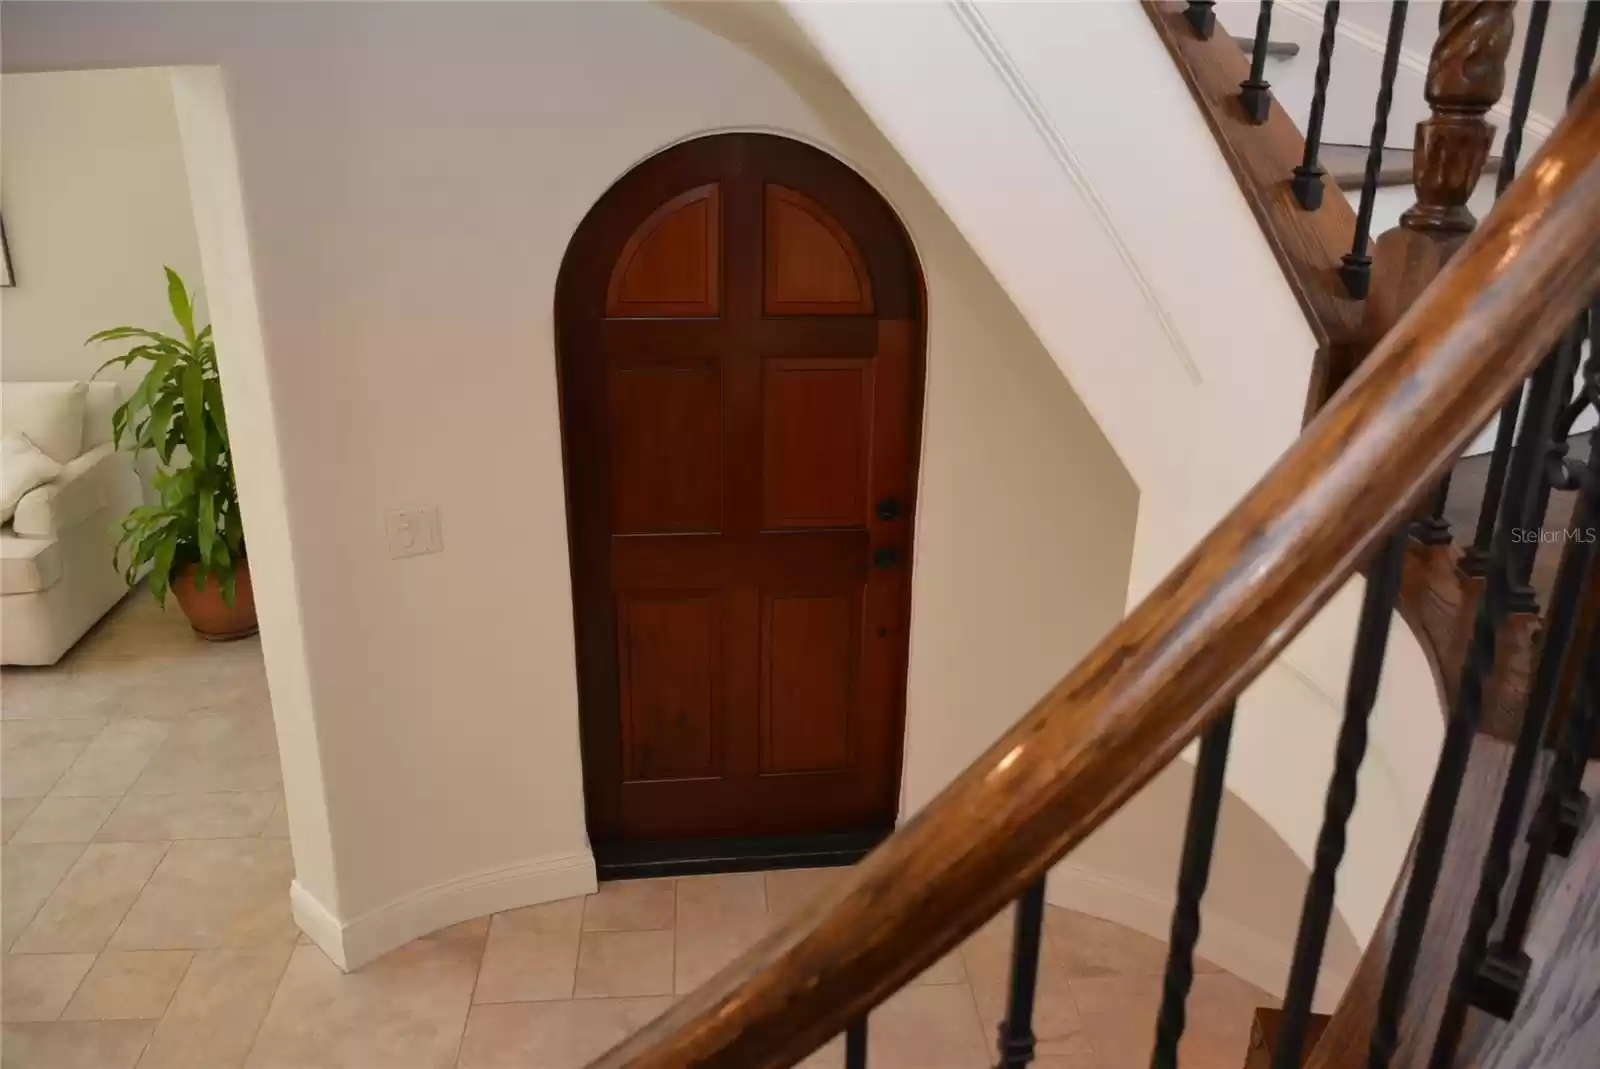 Enter the front door into the foyer that includes an elegant hardwood and wrought iron spiral staircase.